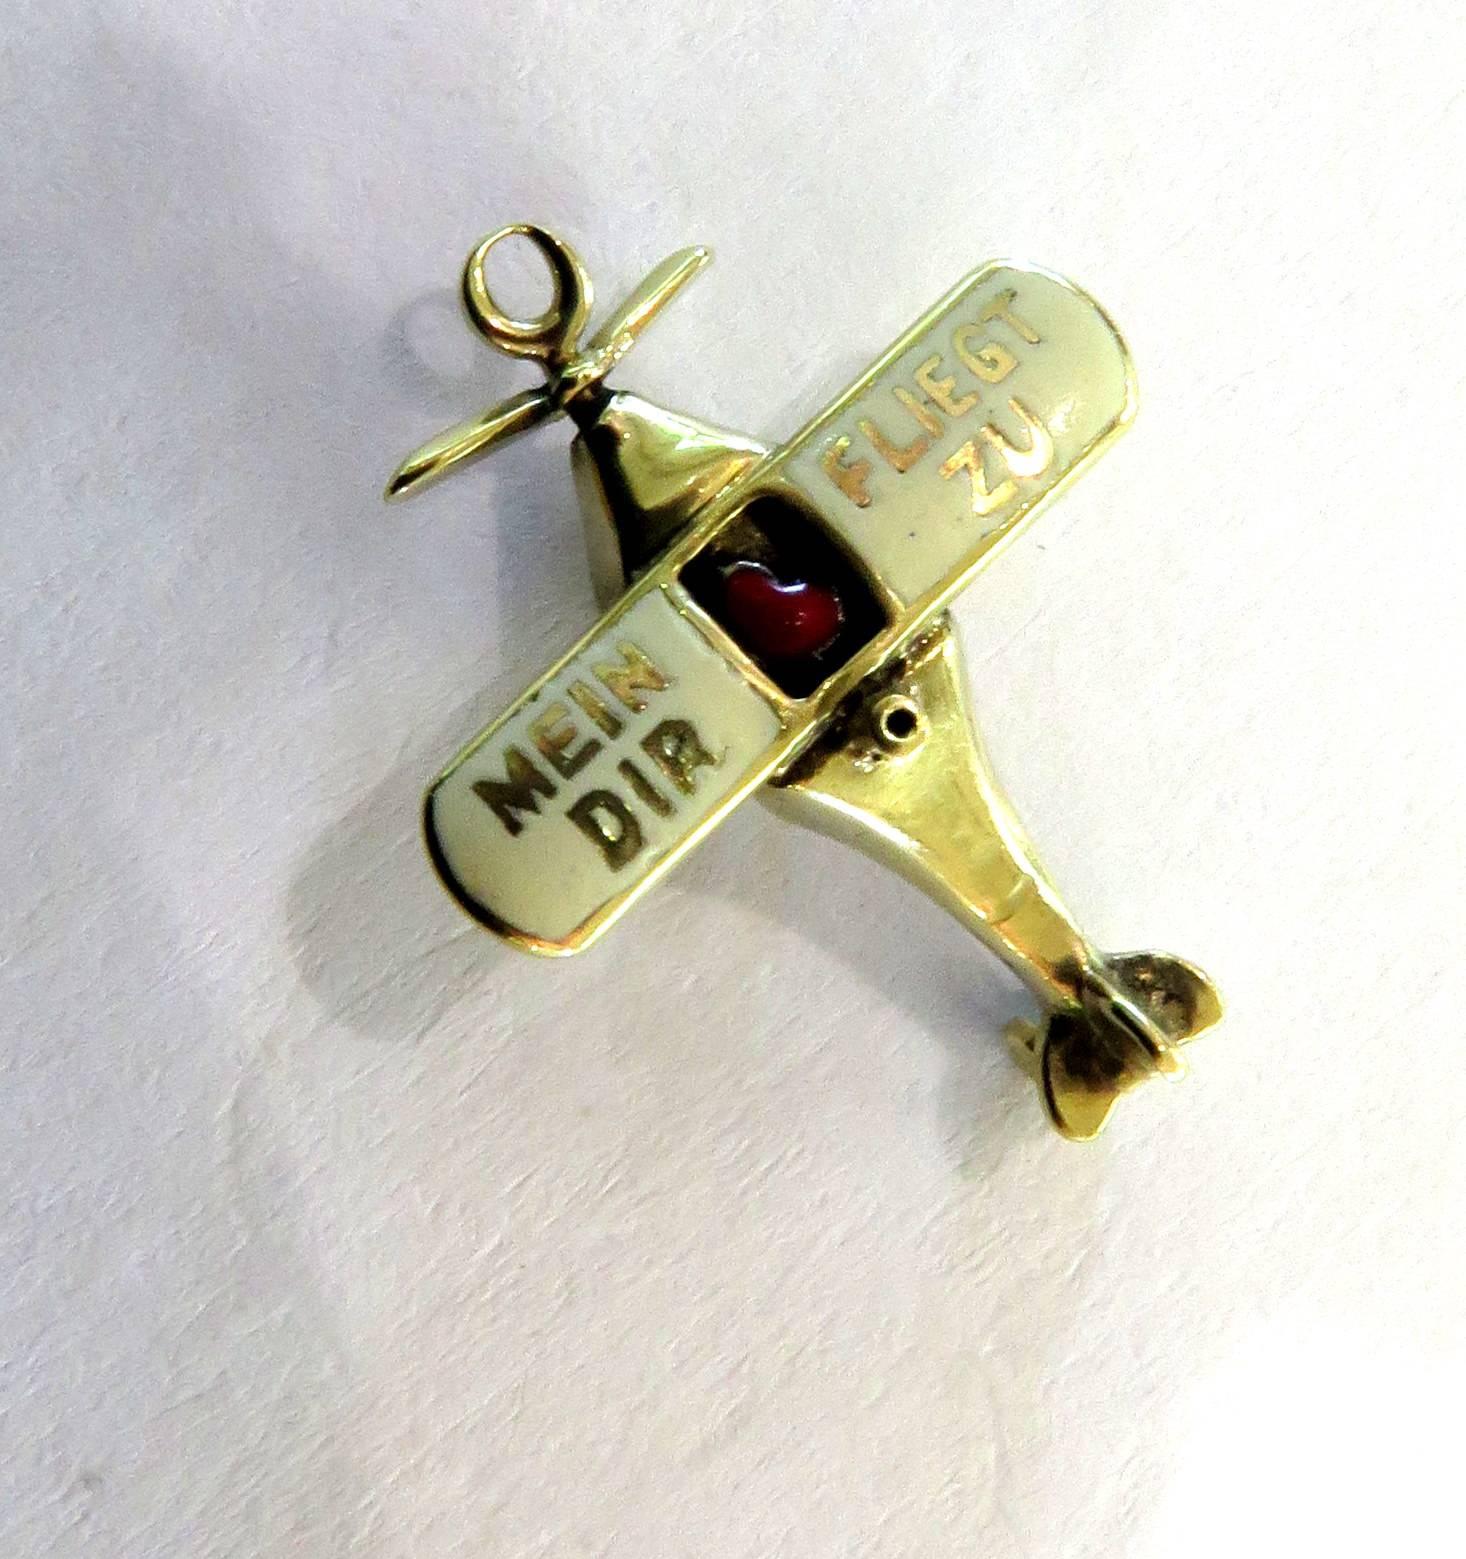 This romantic 14k airplane charm is just incredible! The enamel on the wings in German say 